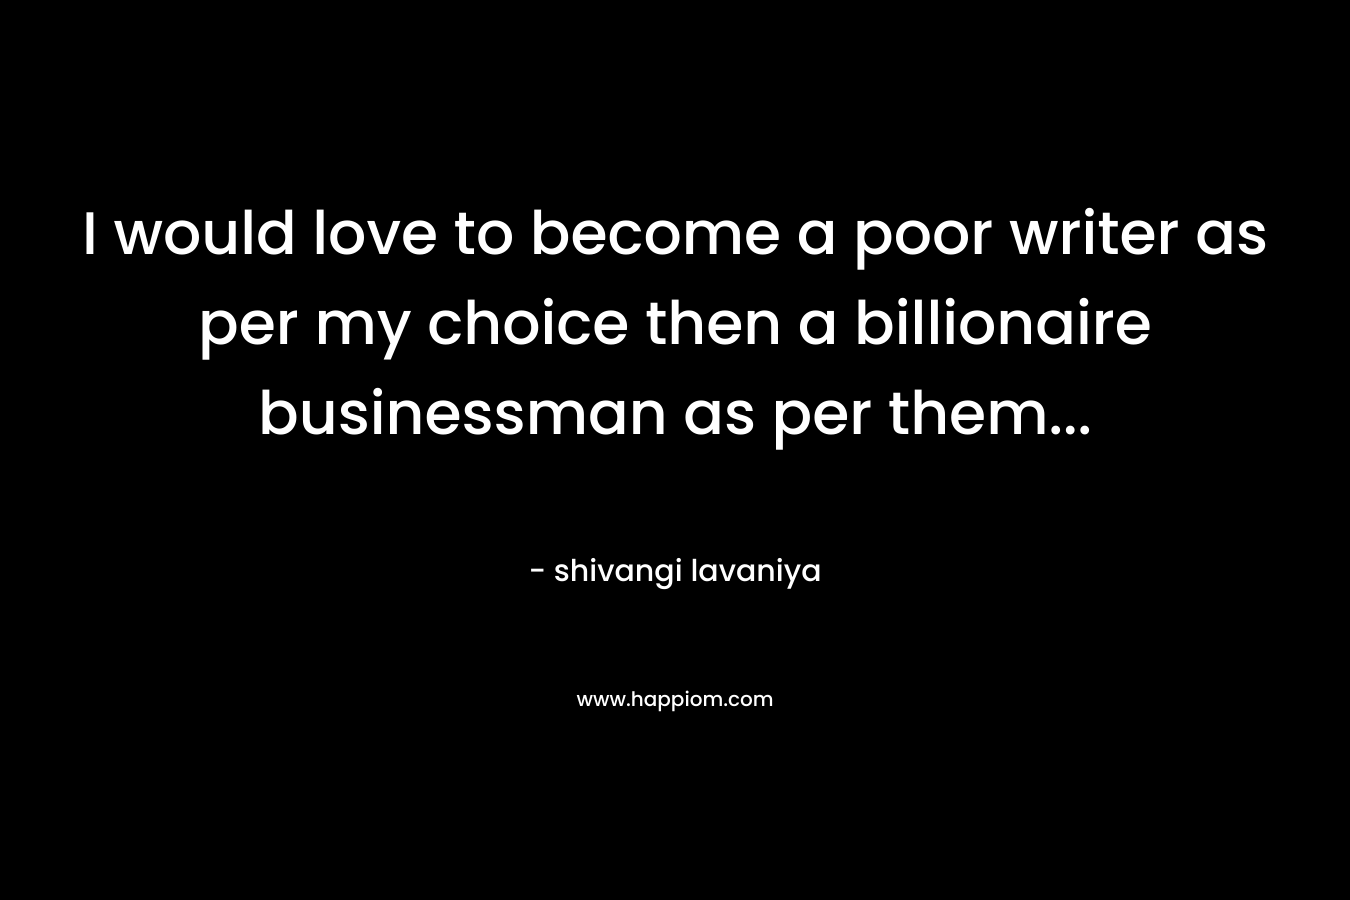 I would love to become a poor writer as per my choice then a billionaire businessman as per them...